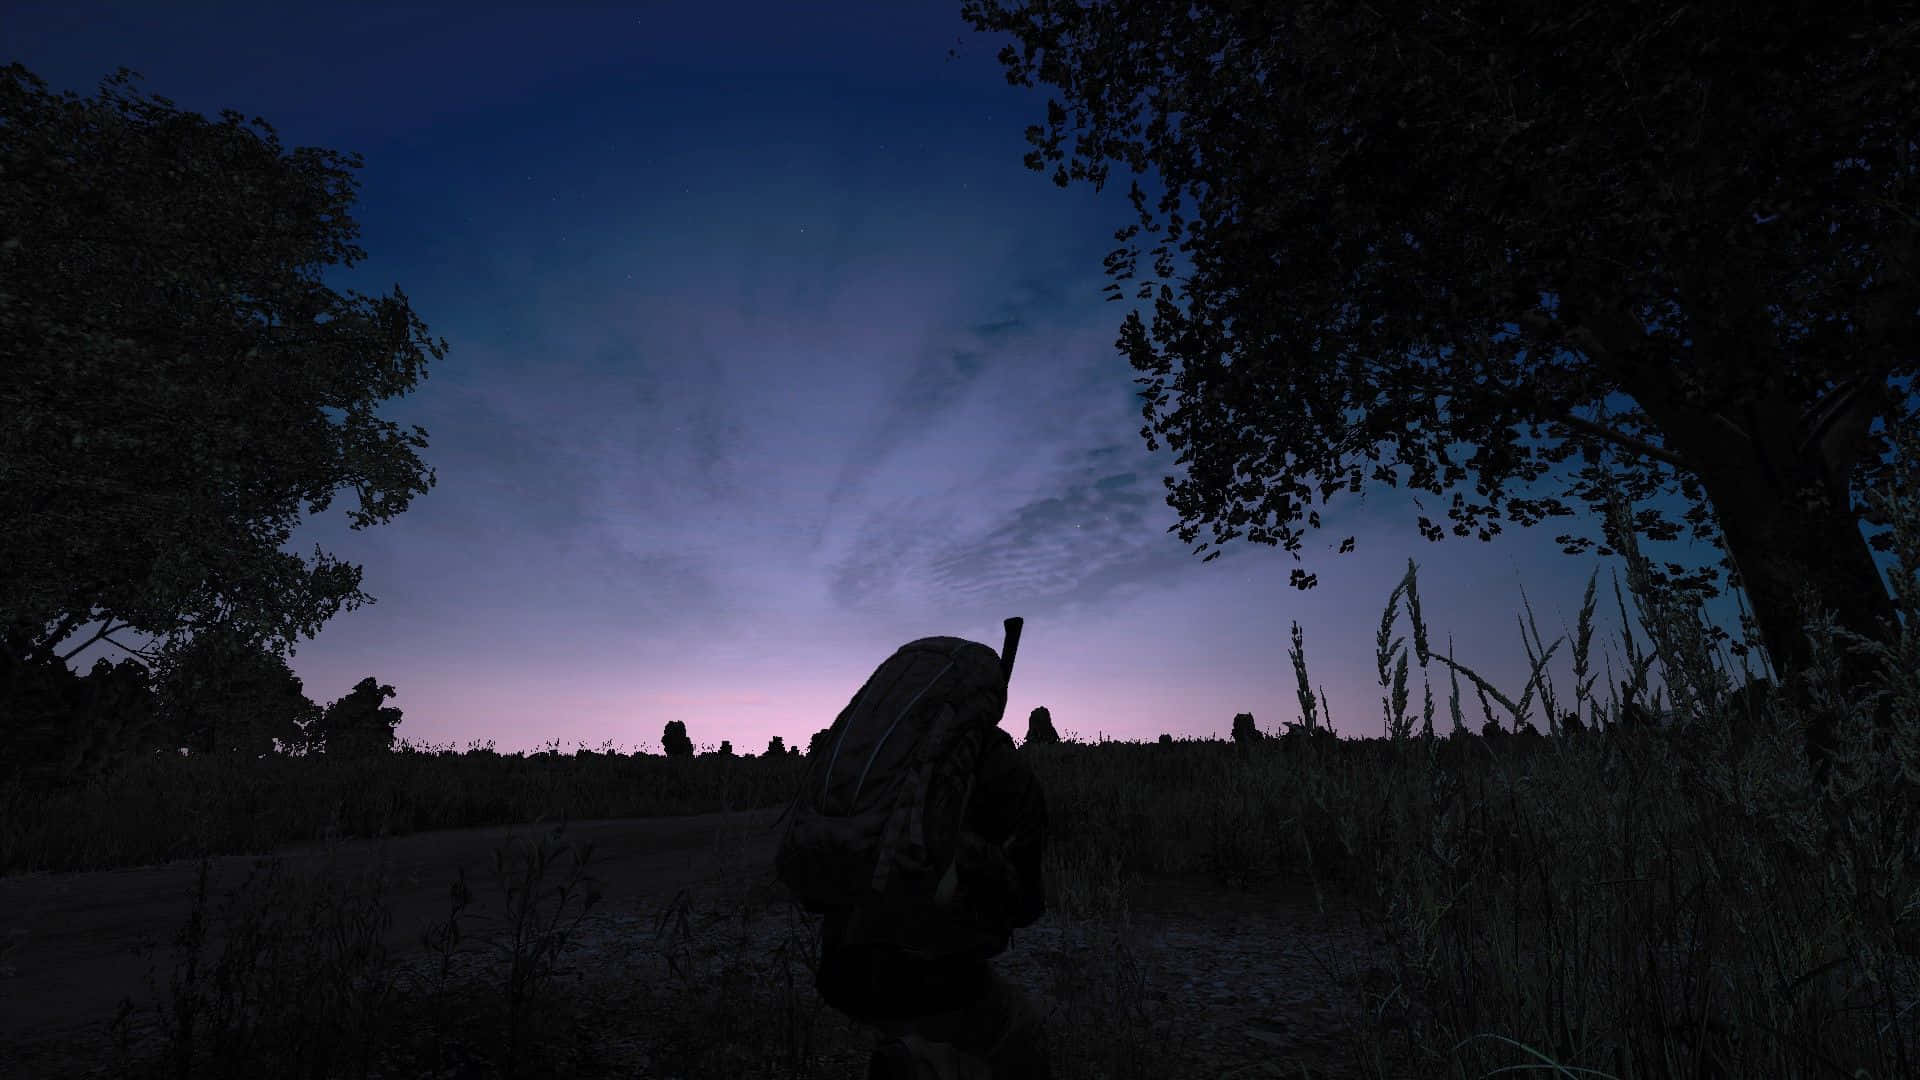 A Man Is Standing In The Middle Of A Field At Night